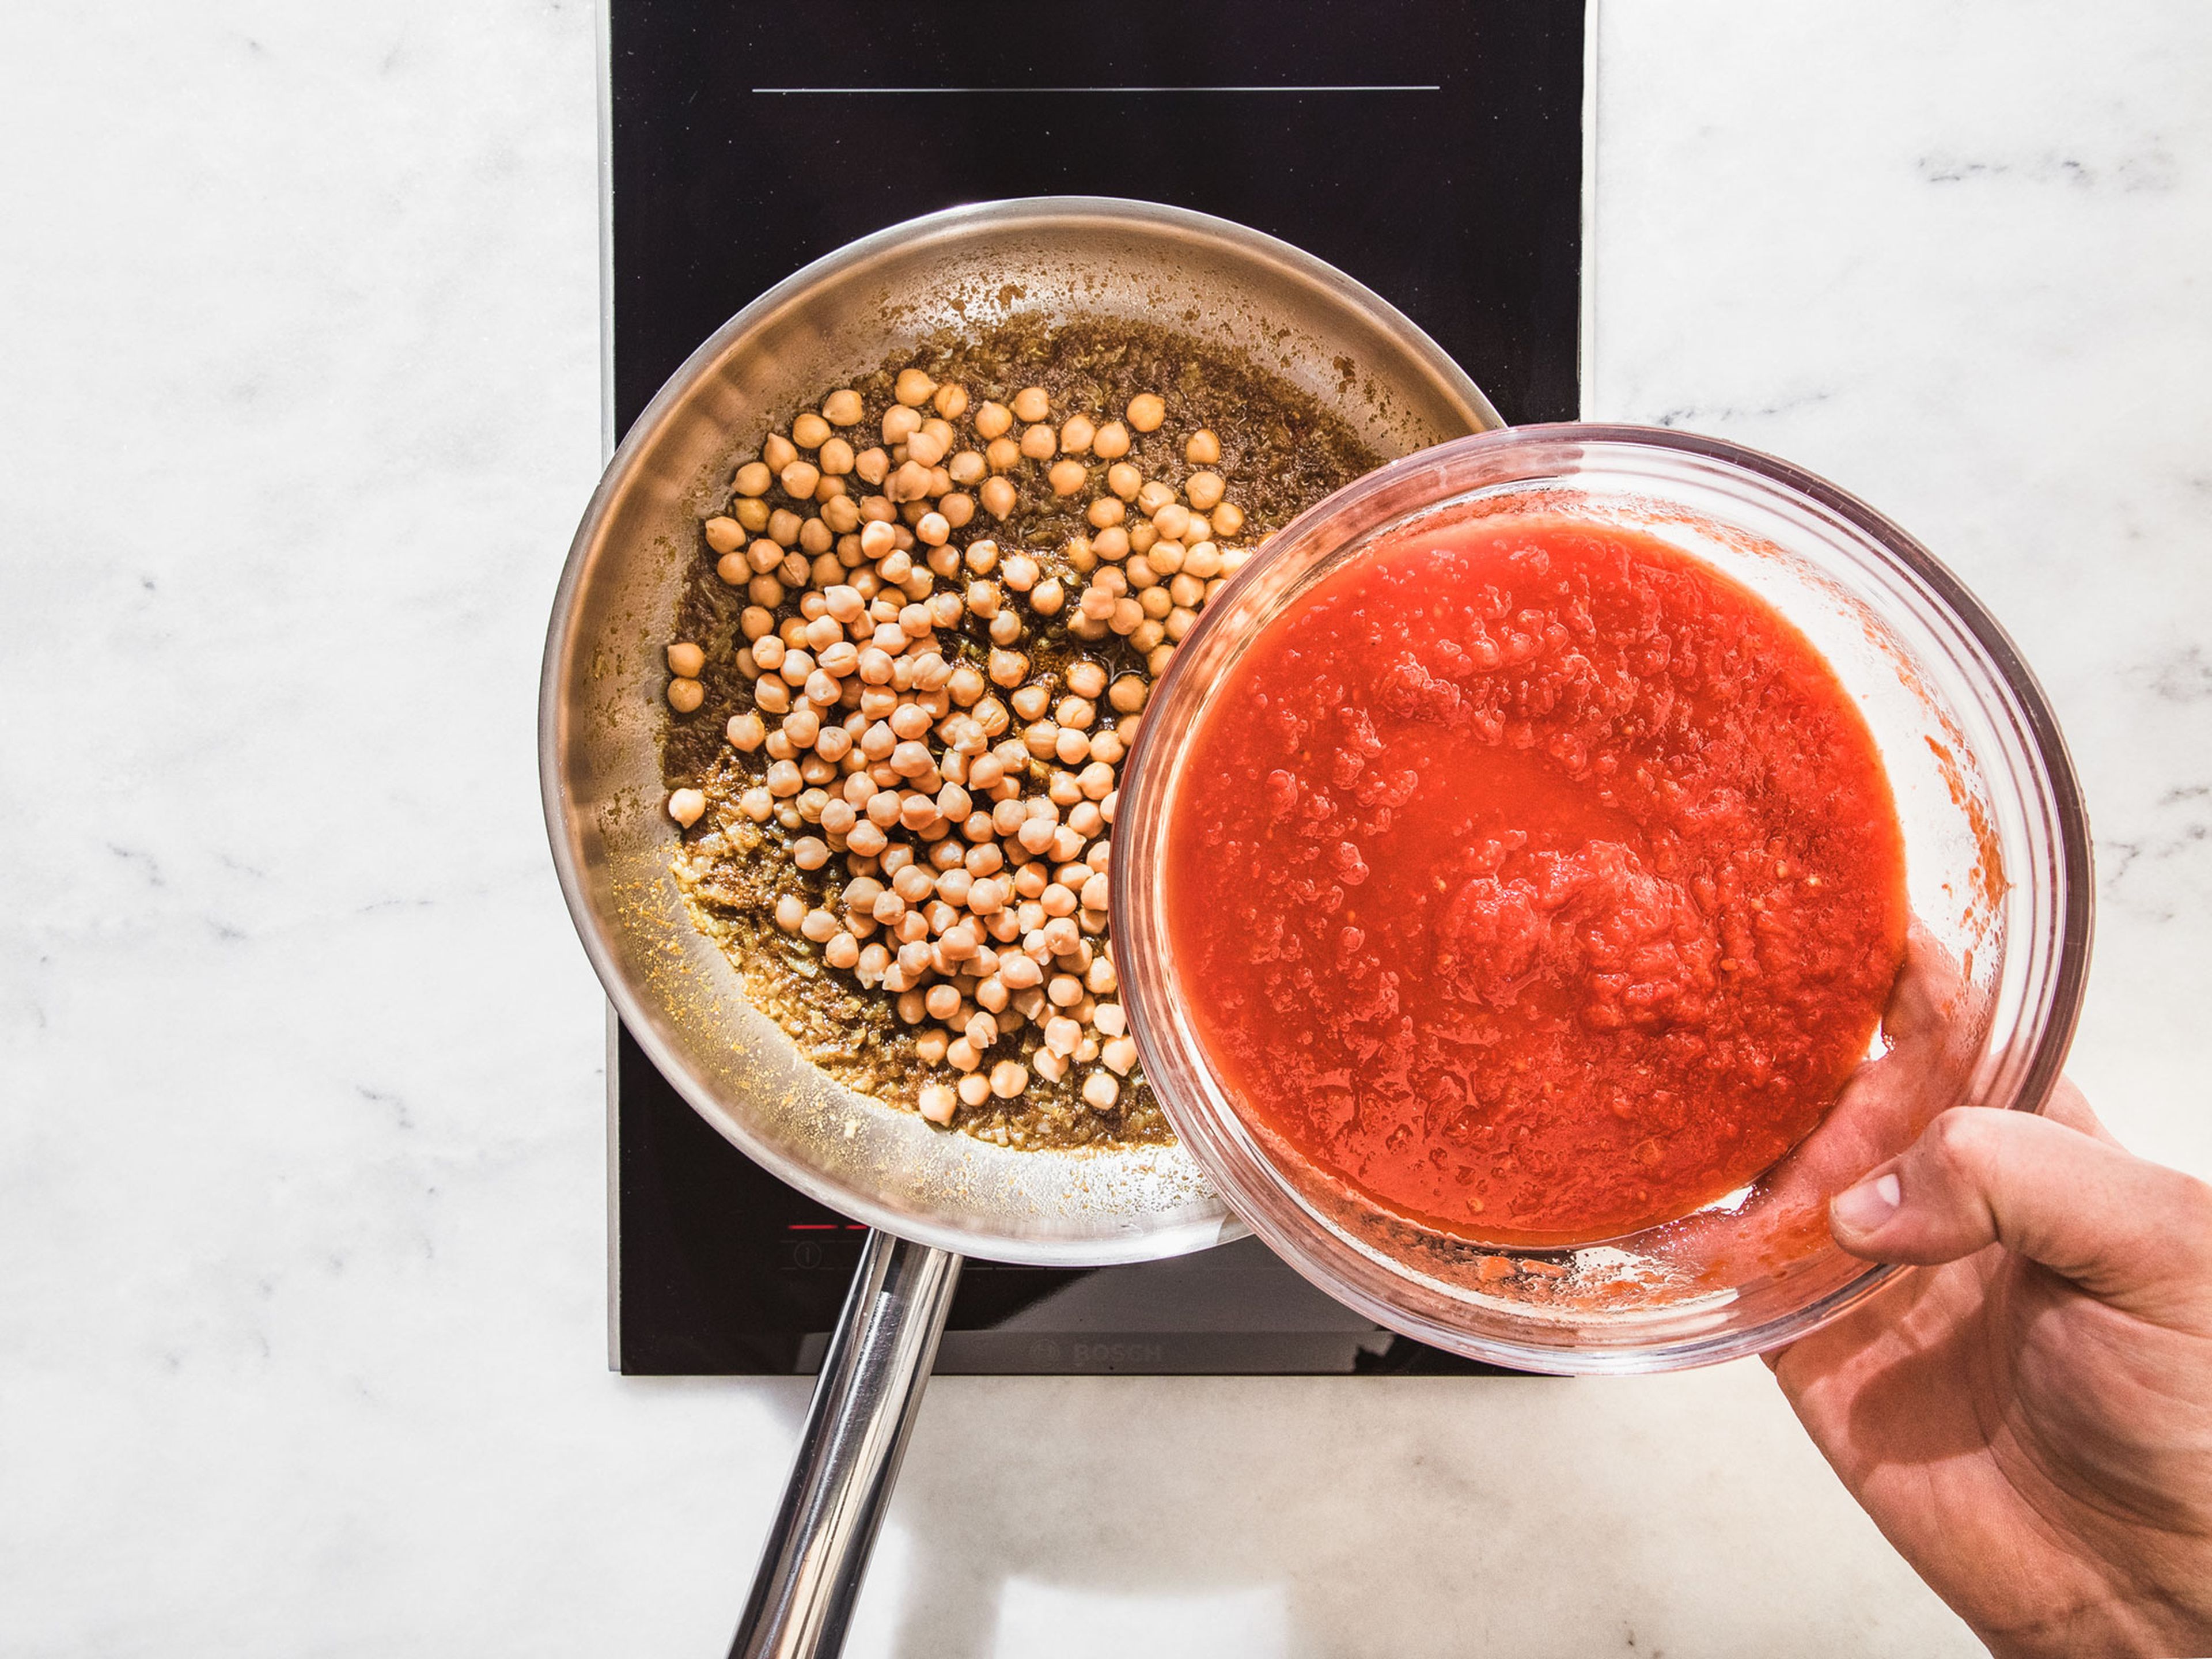 Heat ghee in a frying pan over medium heat. Add onion and sauté for approx. 5 min., or until translucent. Add spice paste, drained chickpeas, crushed tomatoes, and water and let simmer for approx. 10 min.